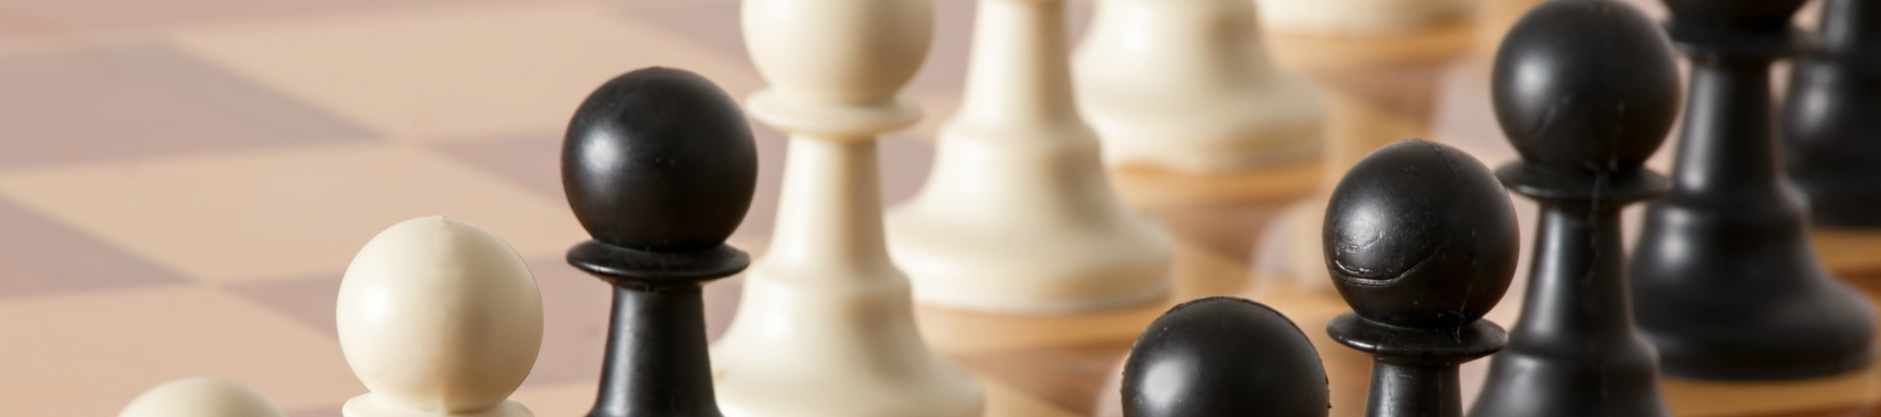 Visible contrast in black and white chess pieces